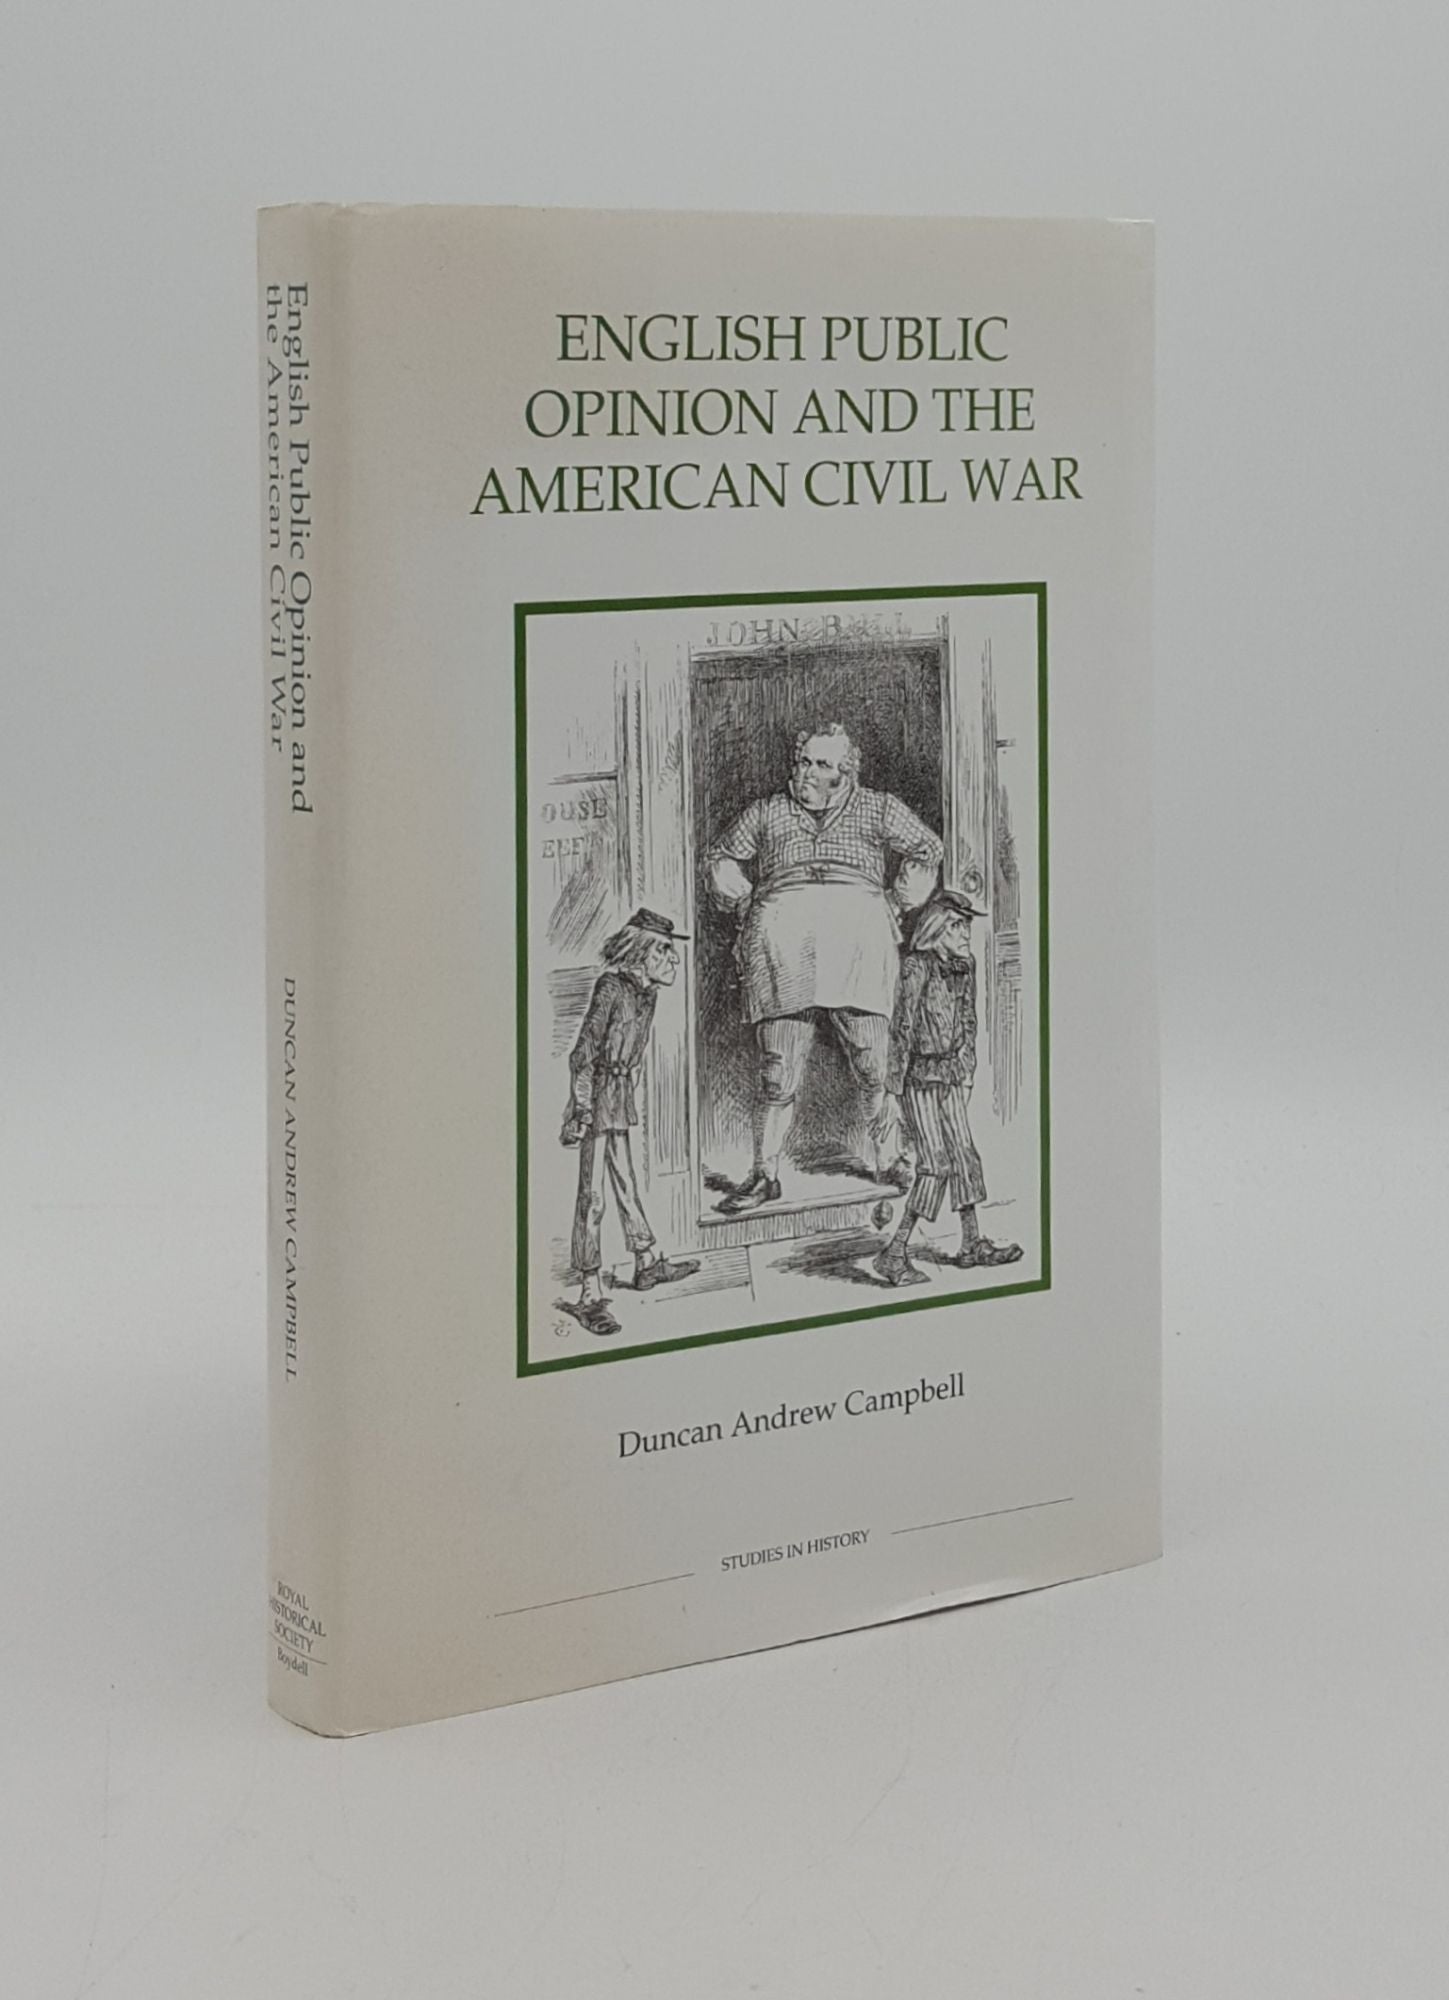 CAMPBELL Duncan Andrew - English Public Opinion and the American CIVIL War